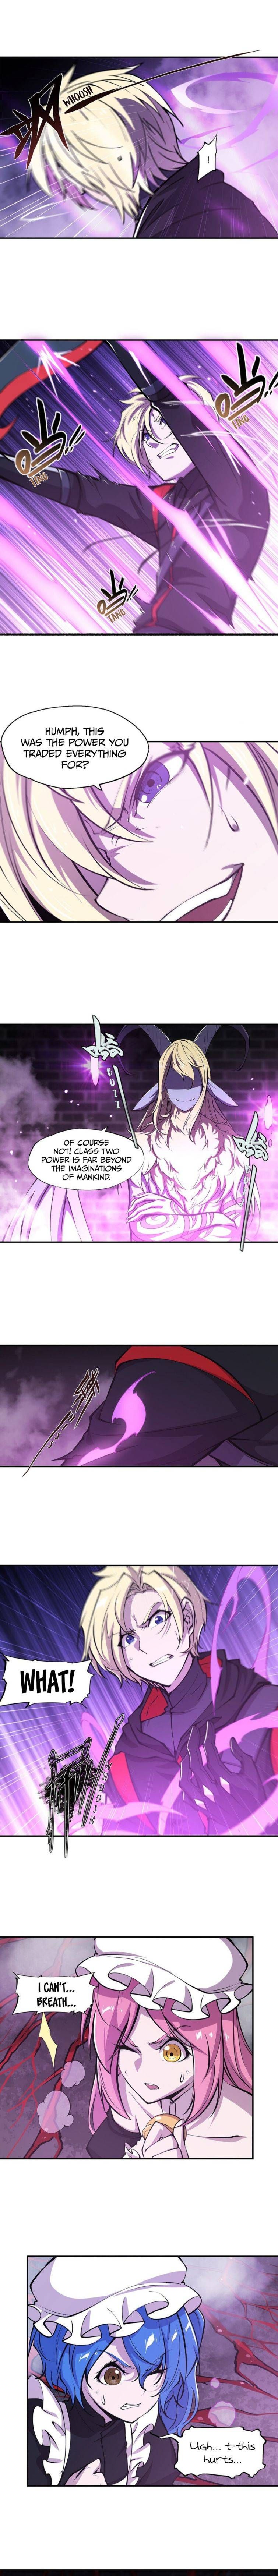 The Blood Princess and the Knight Chapter 90 page 5